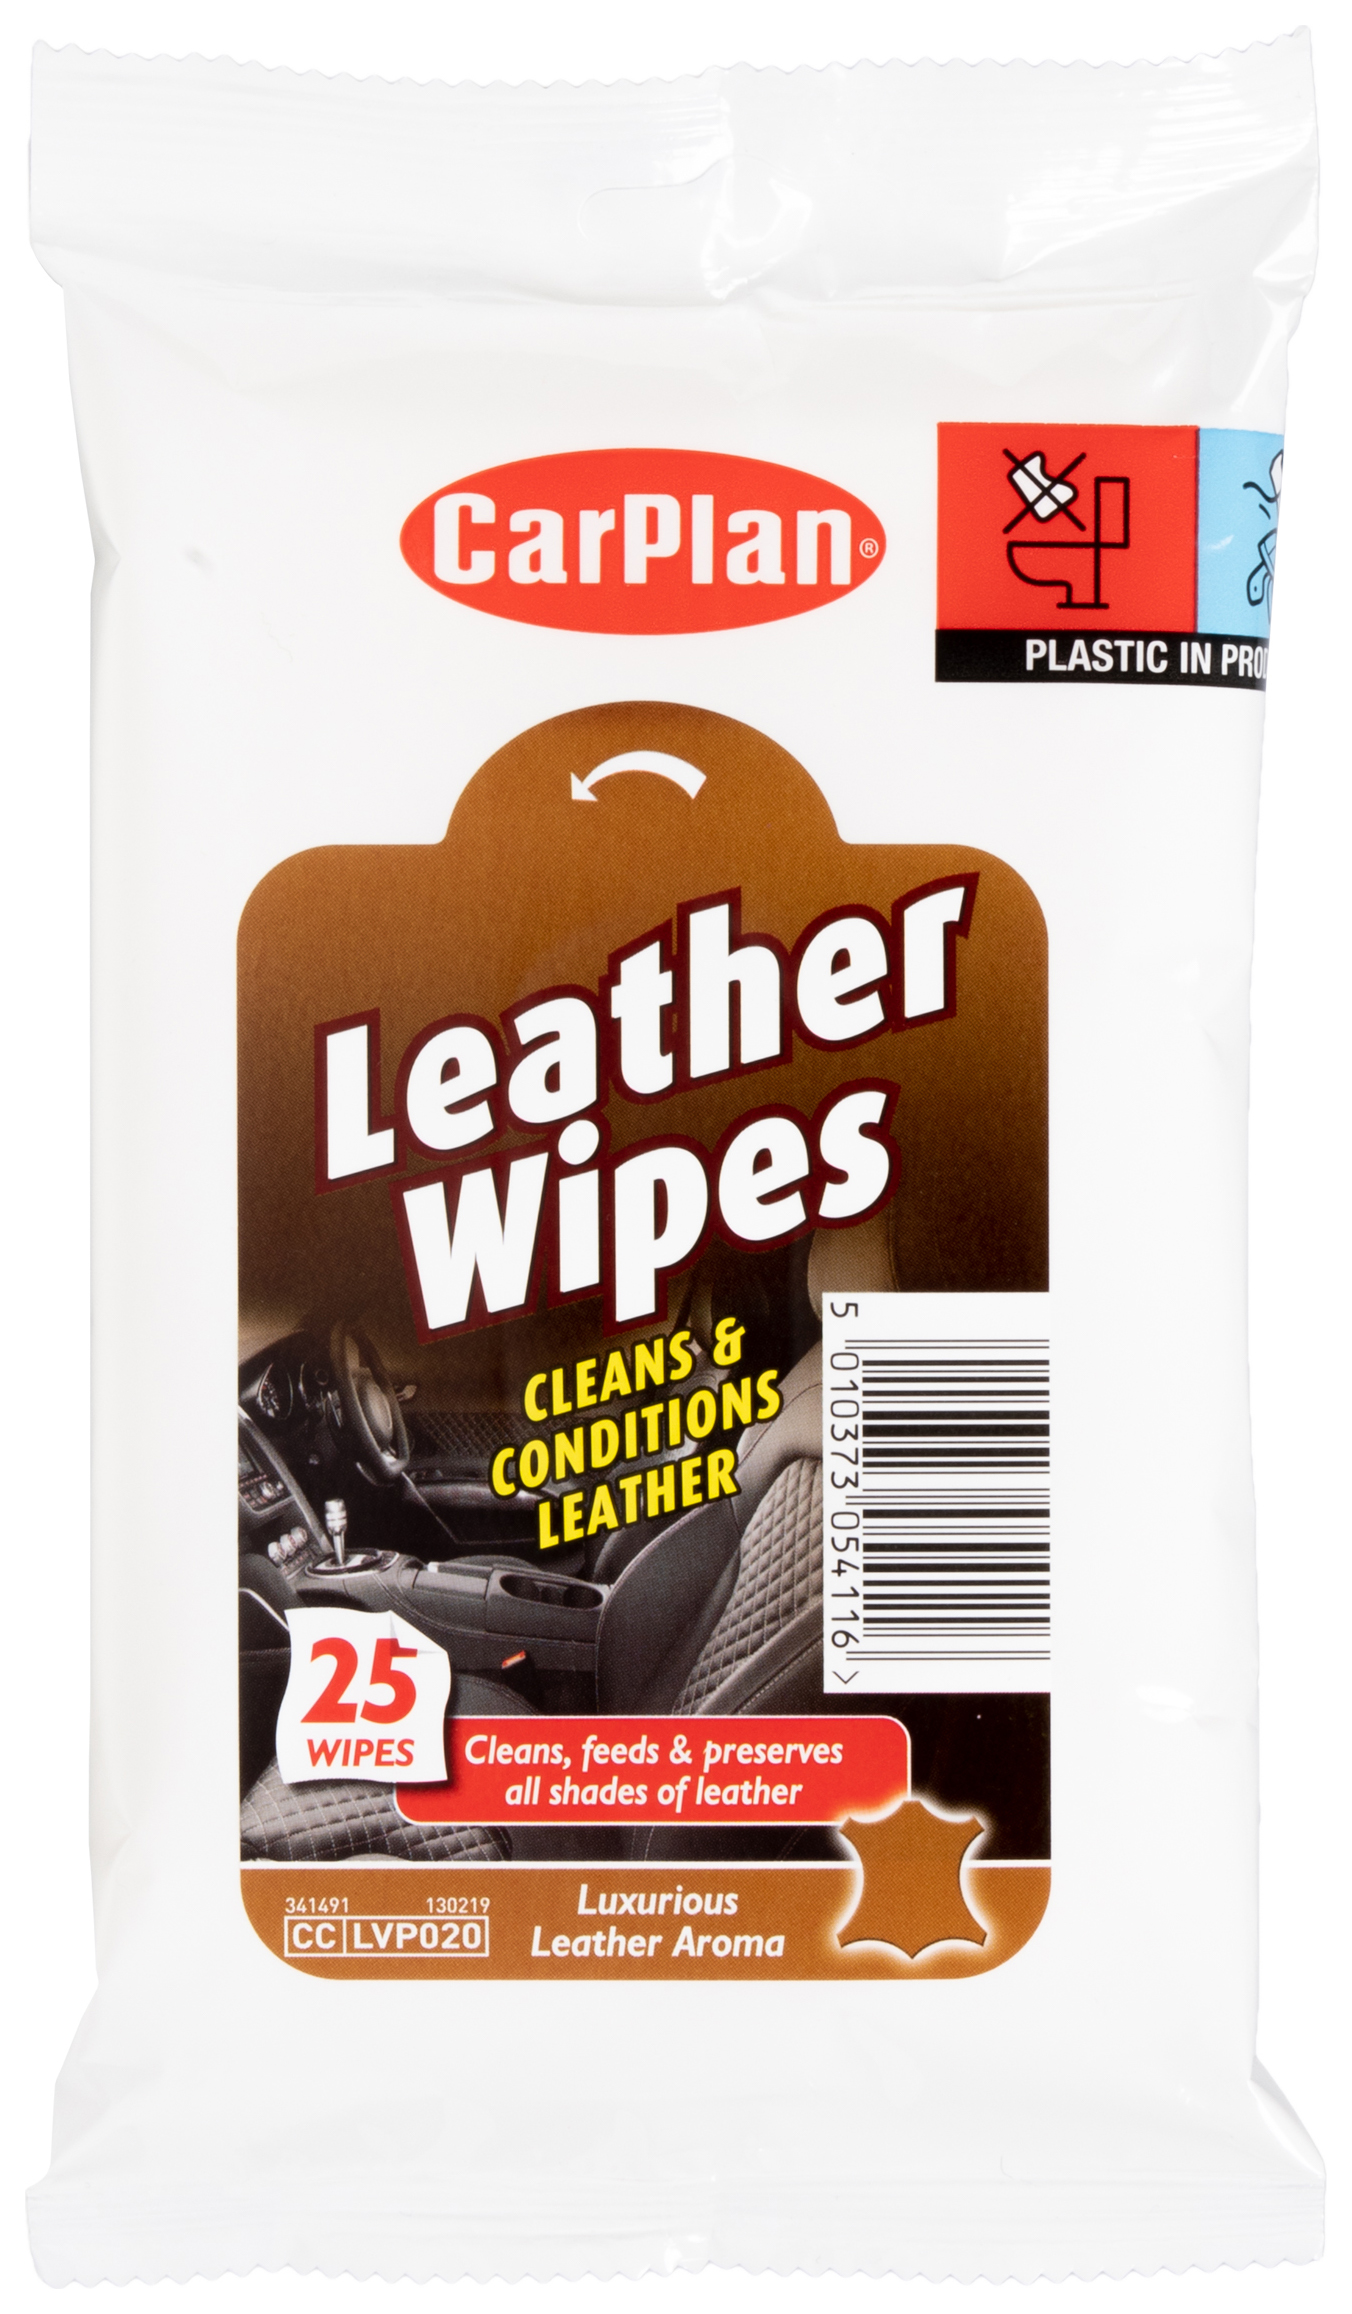 CarPlan Leather Wipes - Pack of 25